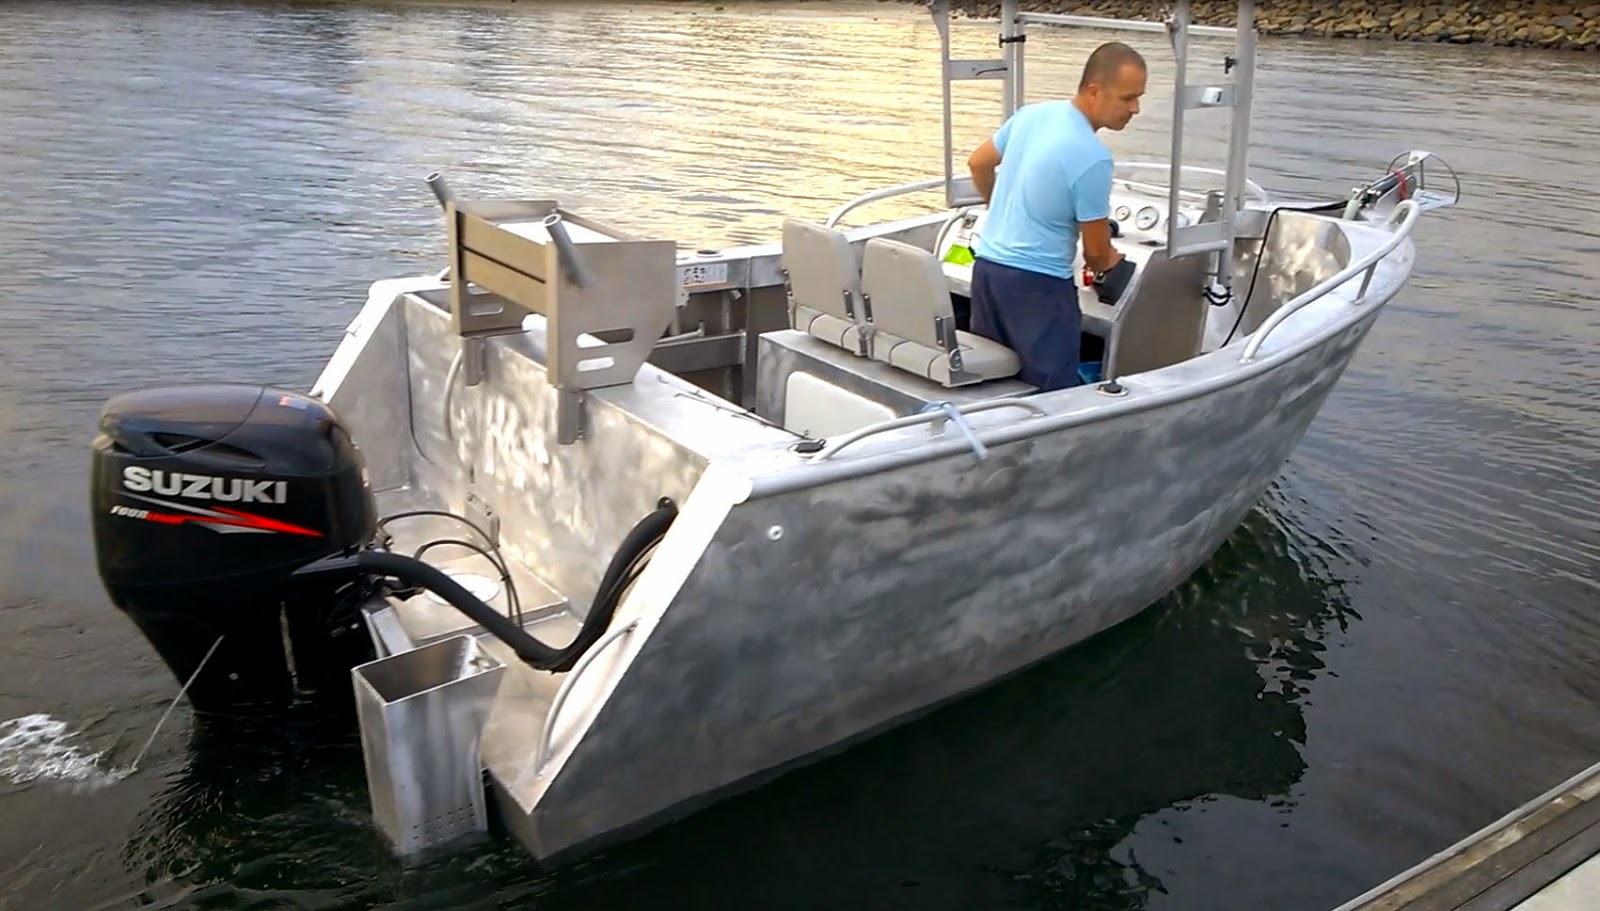 bill's cnc marine boat build - 'tailor-made'